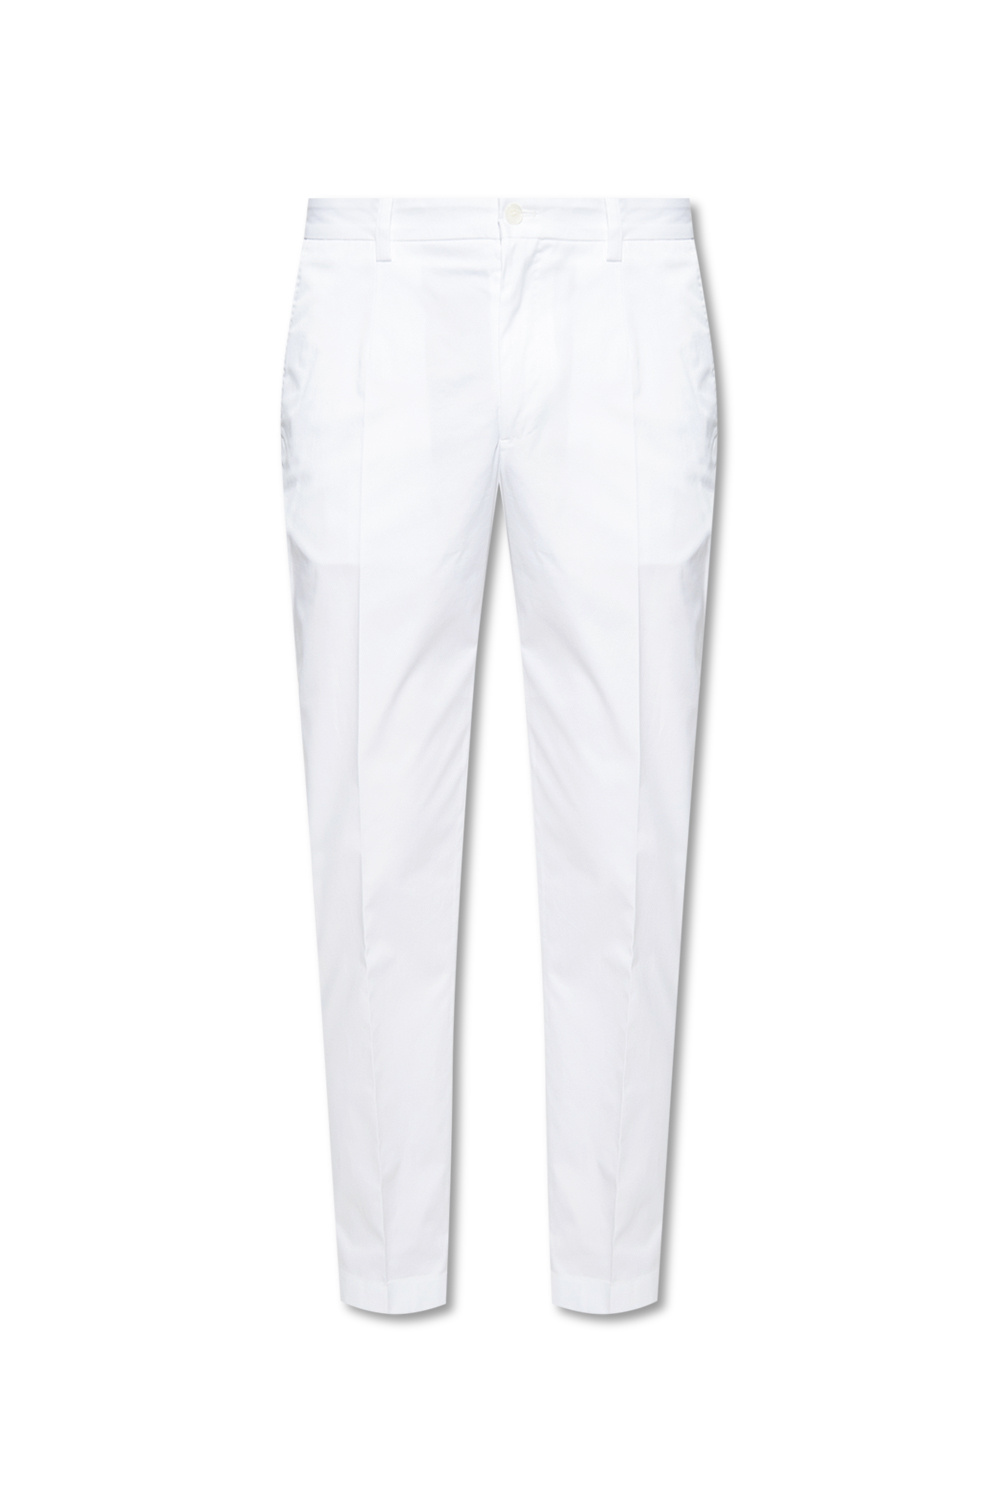 Dolce & Gabbana Cotton Pants in White Womens Clothing Trousers Slacks and Chinos Skinny trousers 